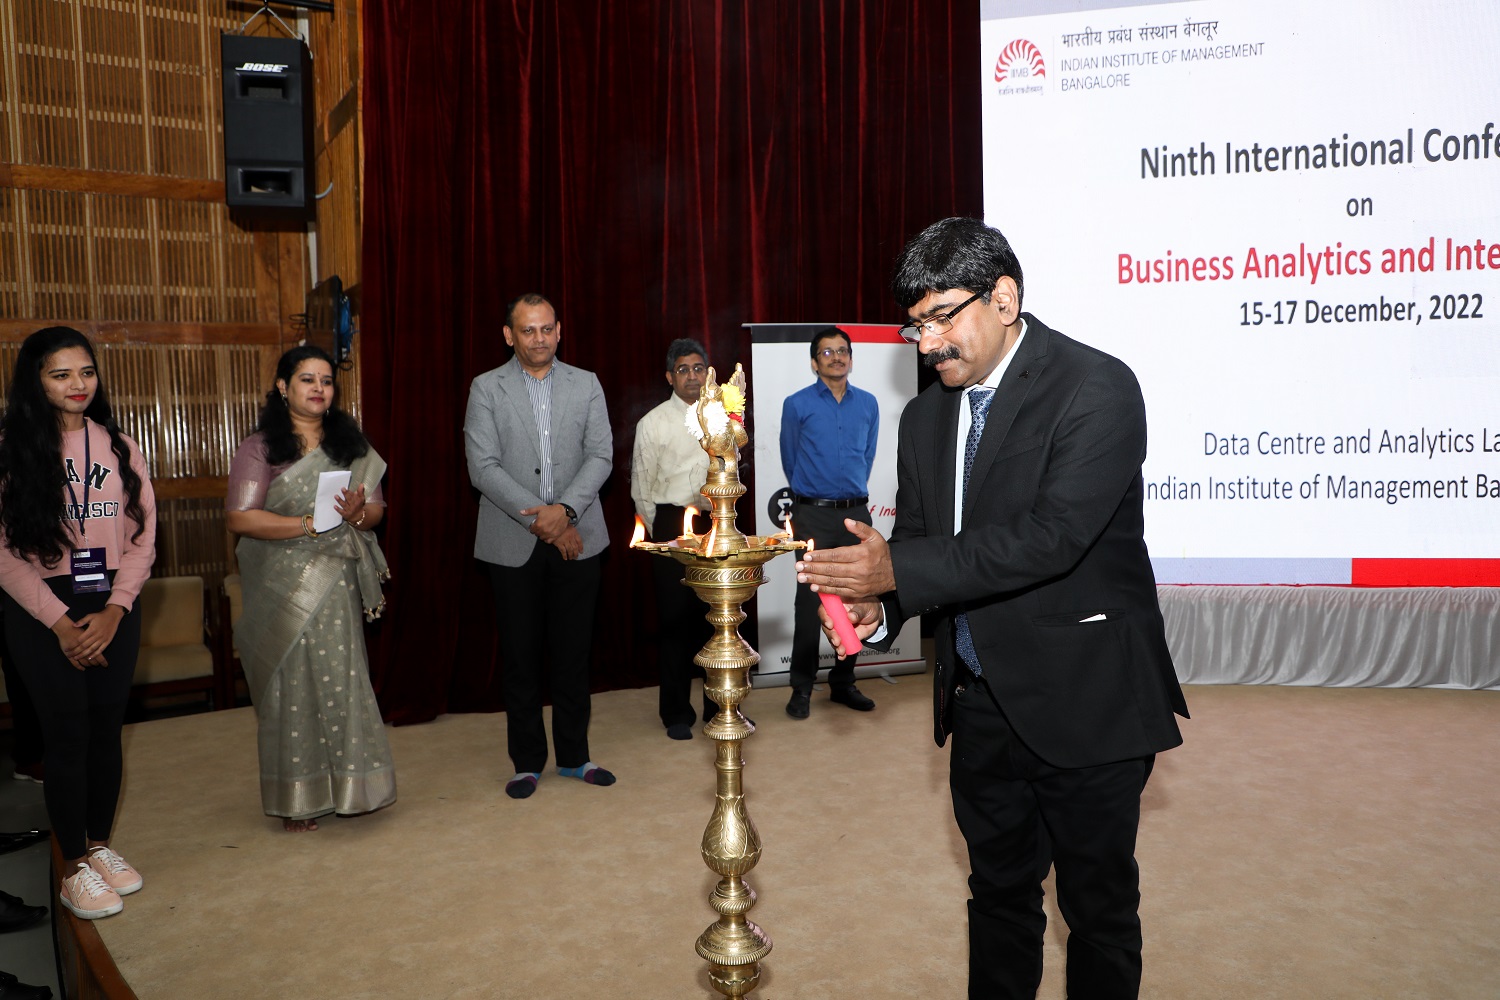 Dr. U Dinesh Kumar, Chairperson of the Data Centre and Analytics Lab, IIMB, inaugurates the 9th International Conference on Business Analytics and Intelligence, on 16 December 2022.